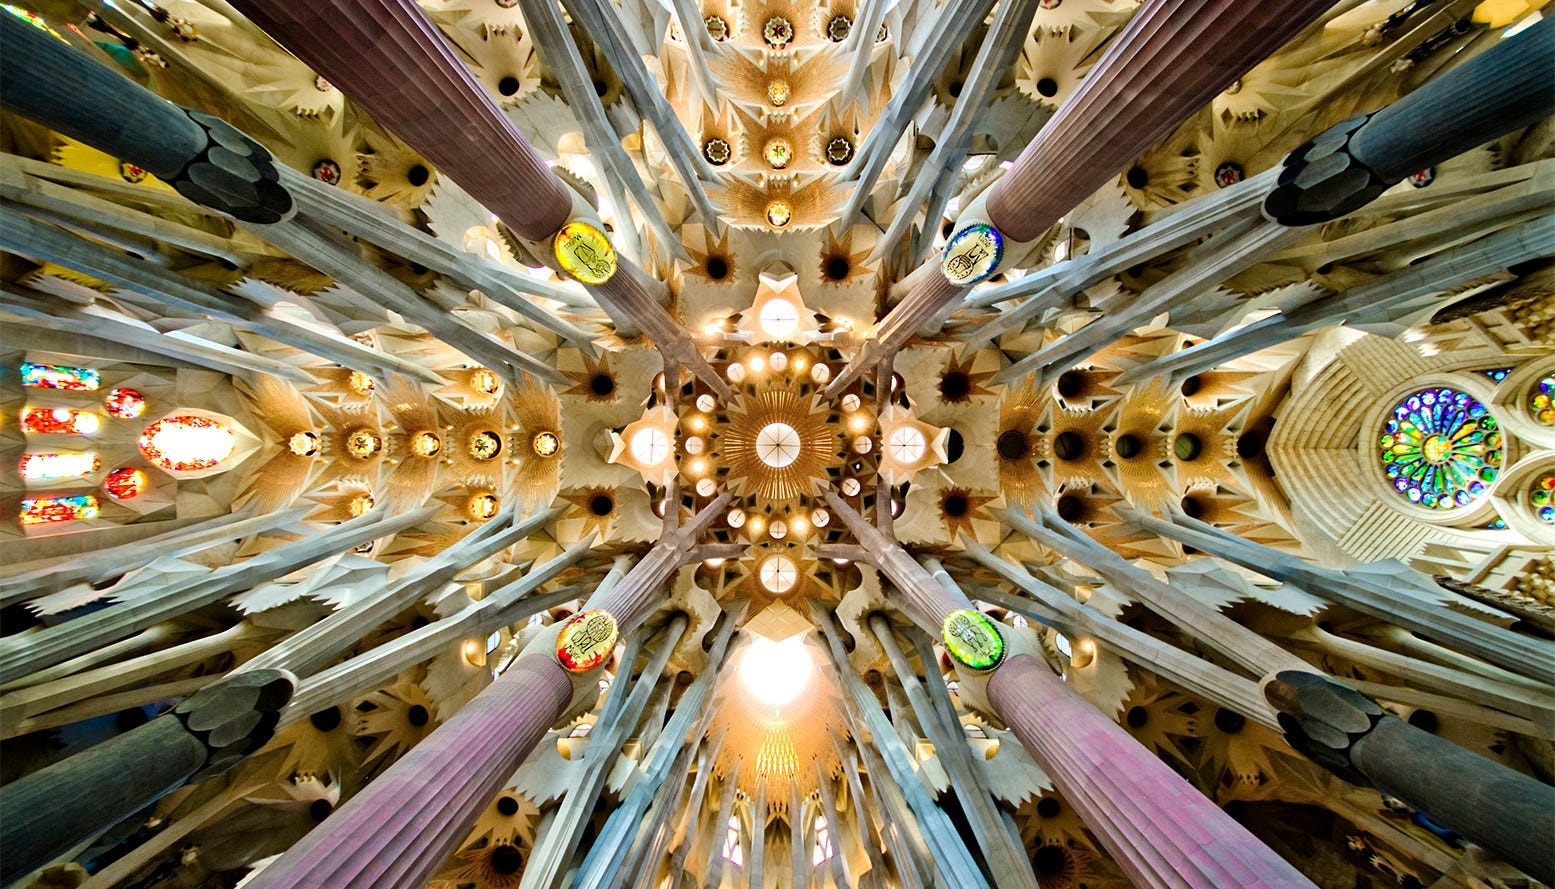 The view of the Sagrada Família looking up.